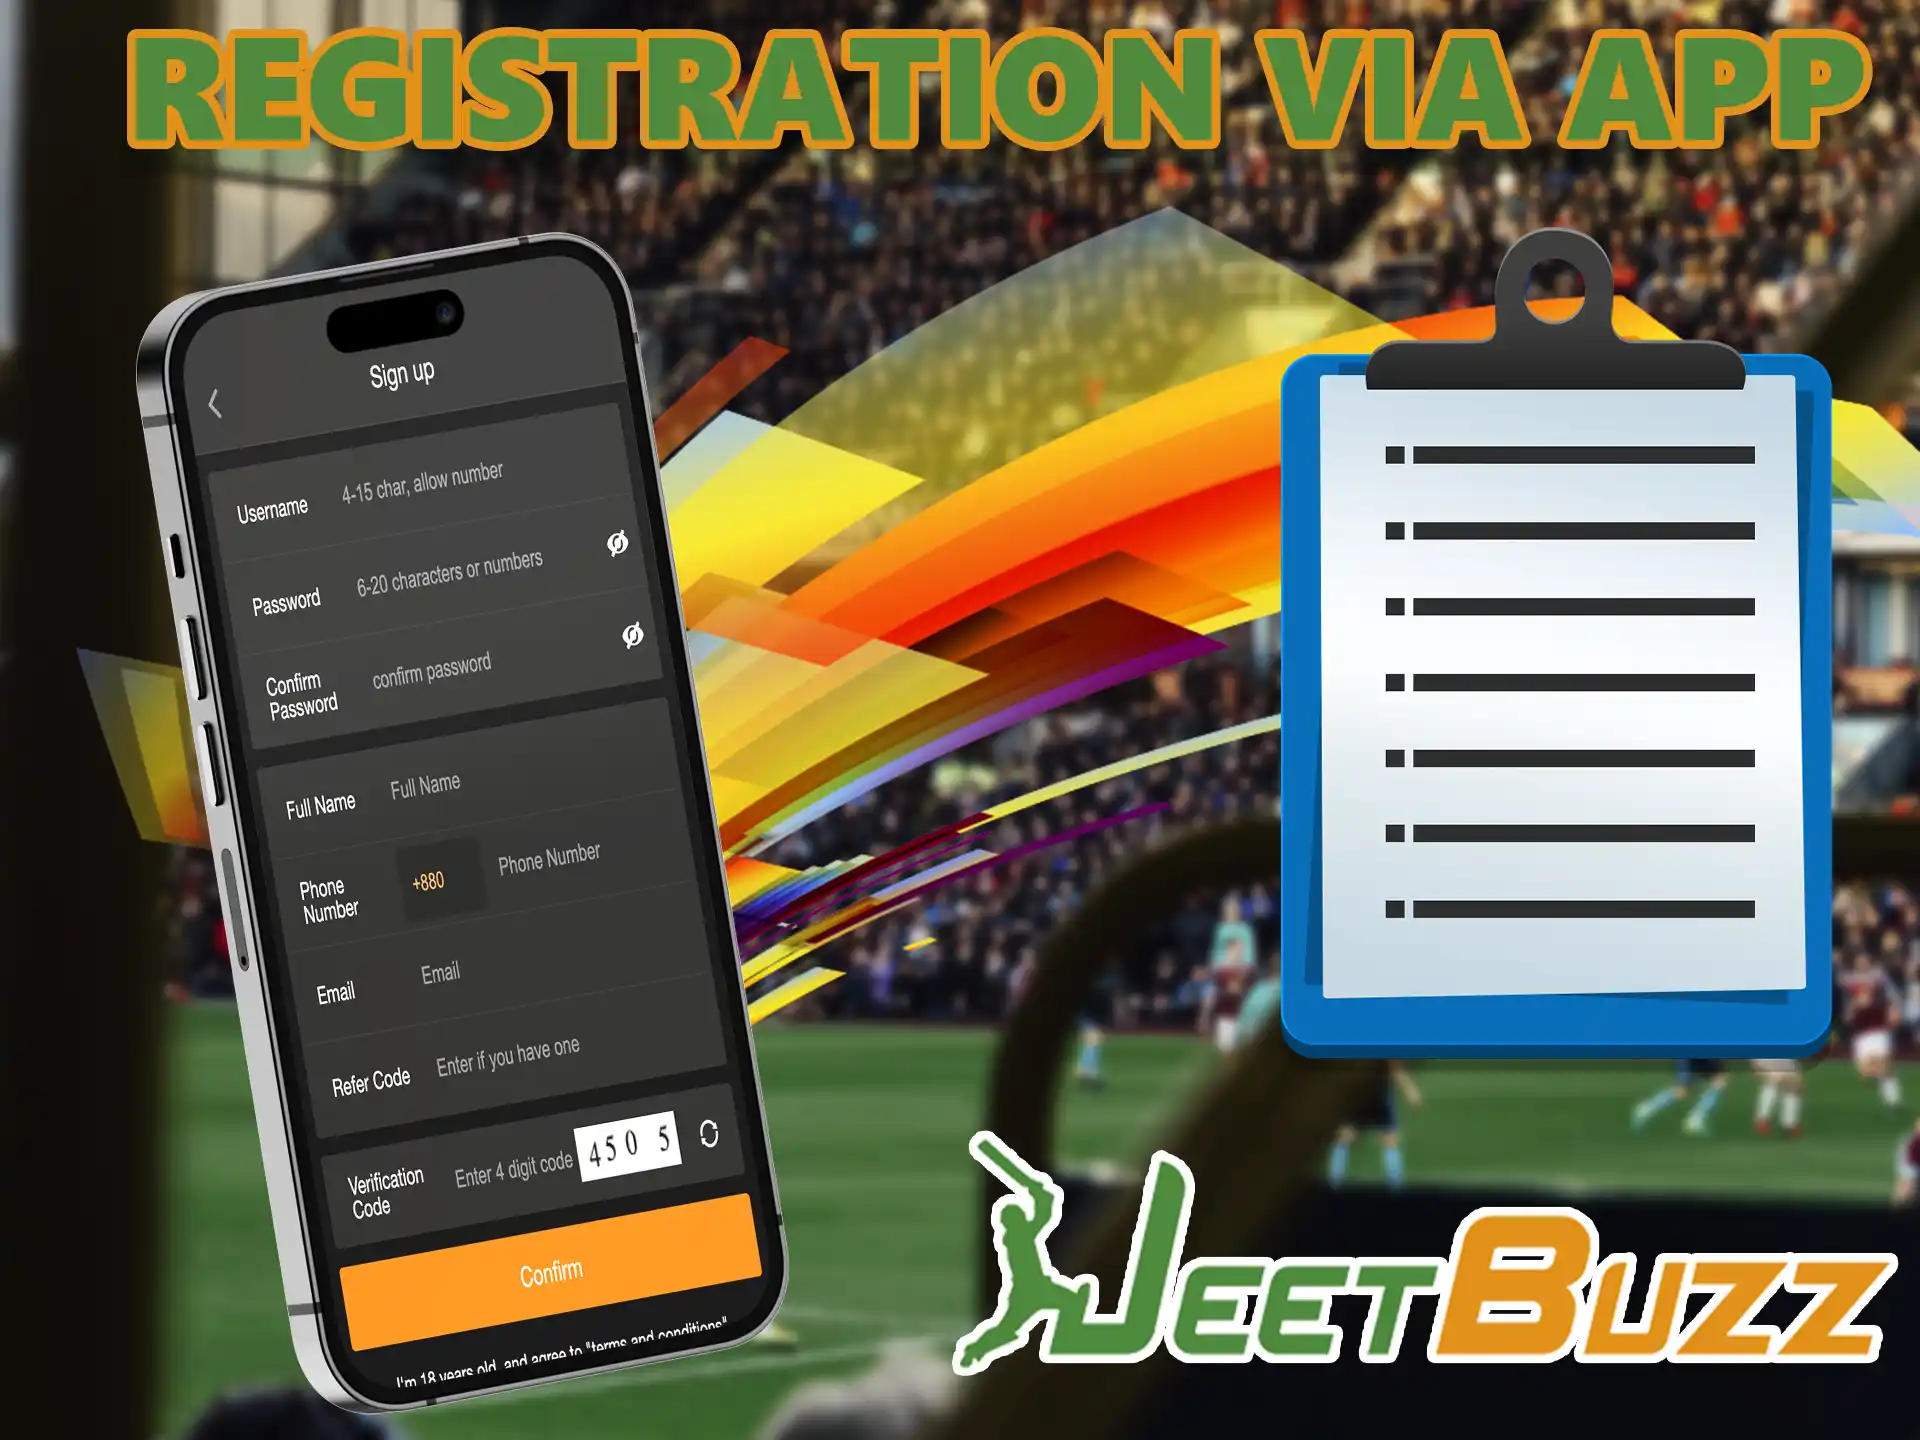 In order to start betting or playing in the casino, you need to create a JeetBuzz account, if you have one - just log in there.